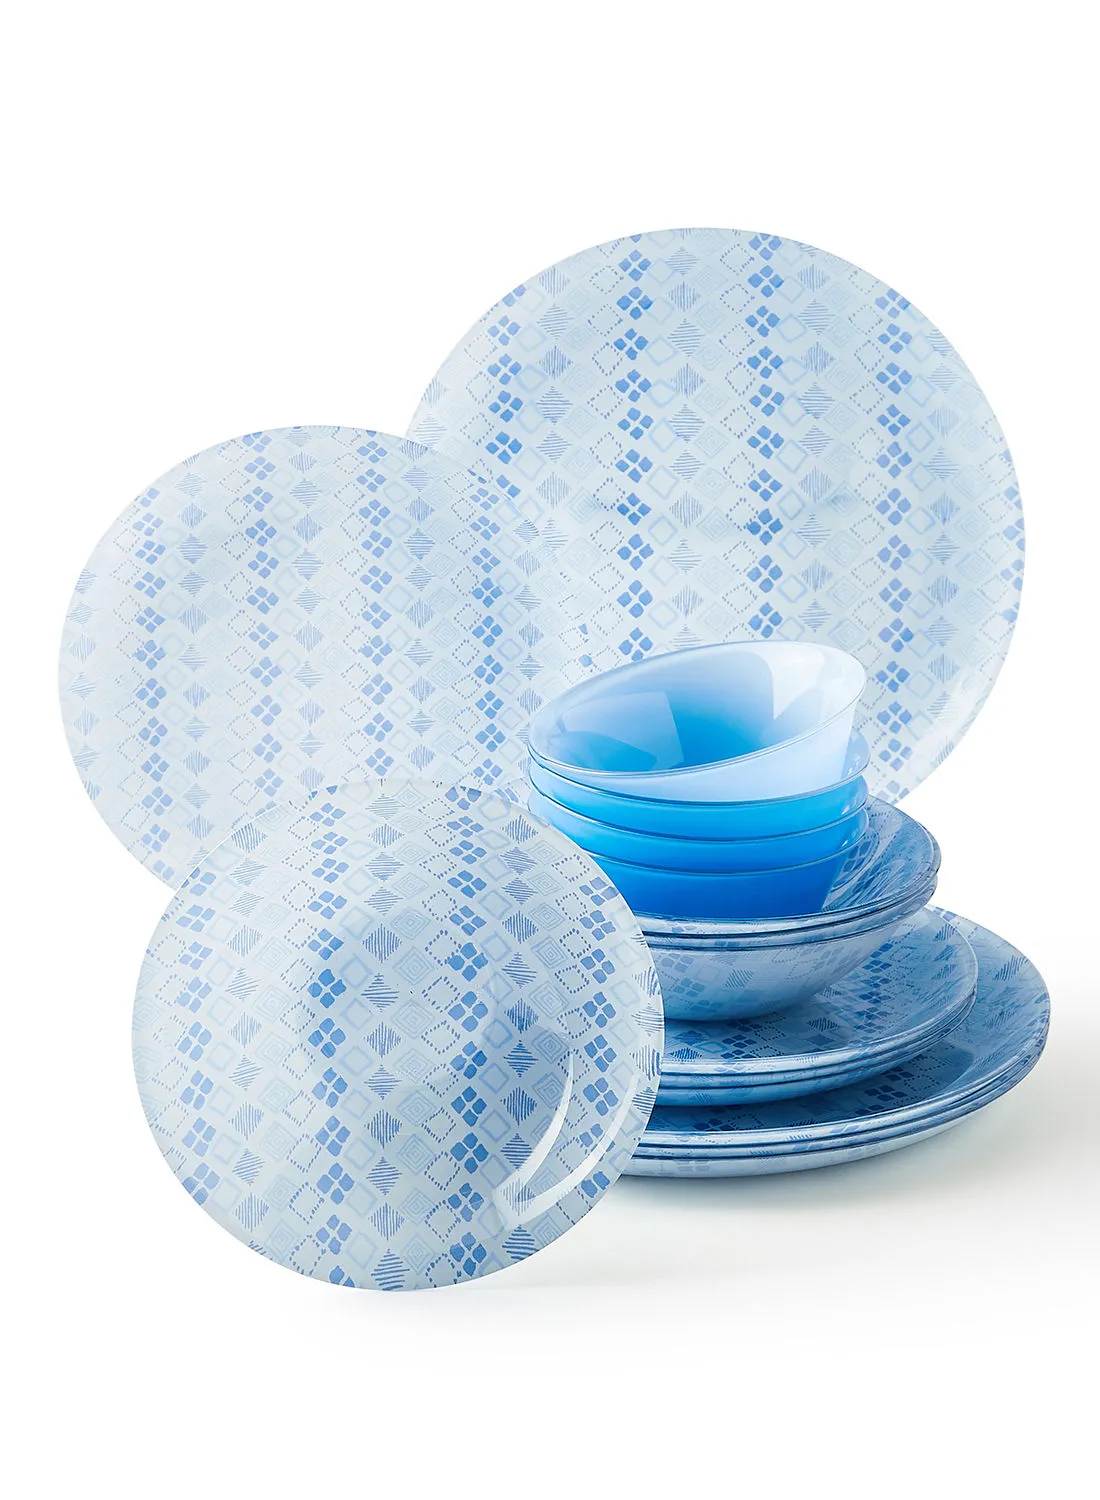 noon east 16 Piece Glass Dinner Set For Everyday Use - Light Weight Dishes, Plates - Dinner Plate, Side Plate, Bowl - Serves 4 - Printed Design Hamsini